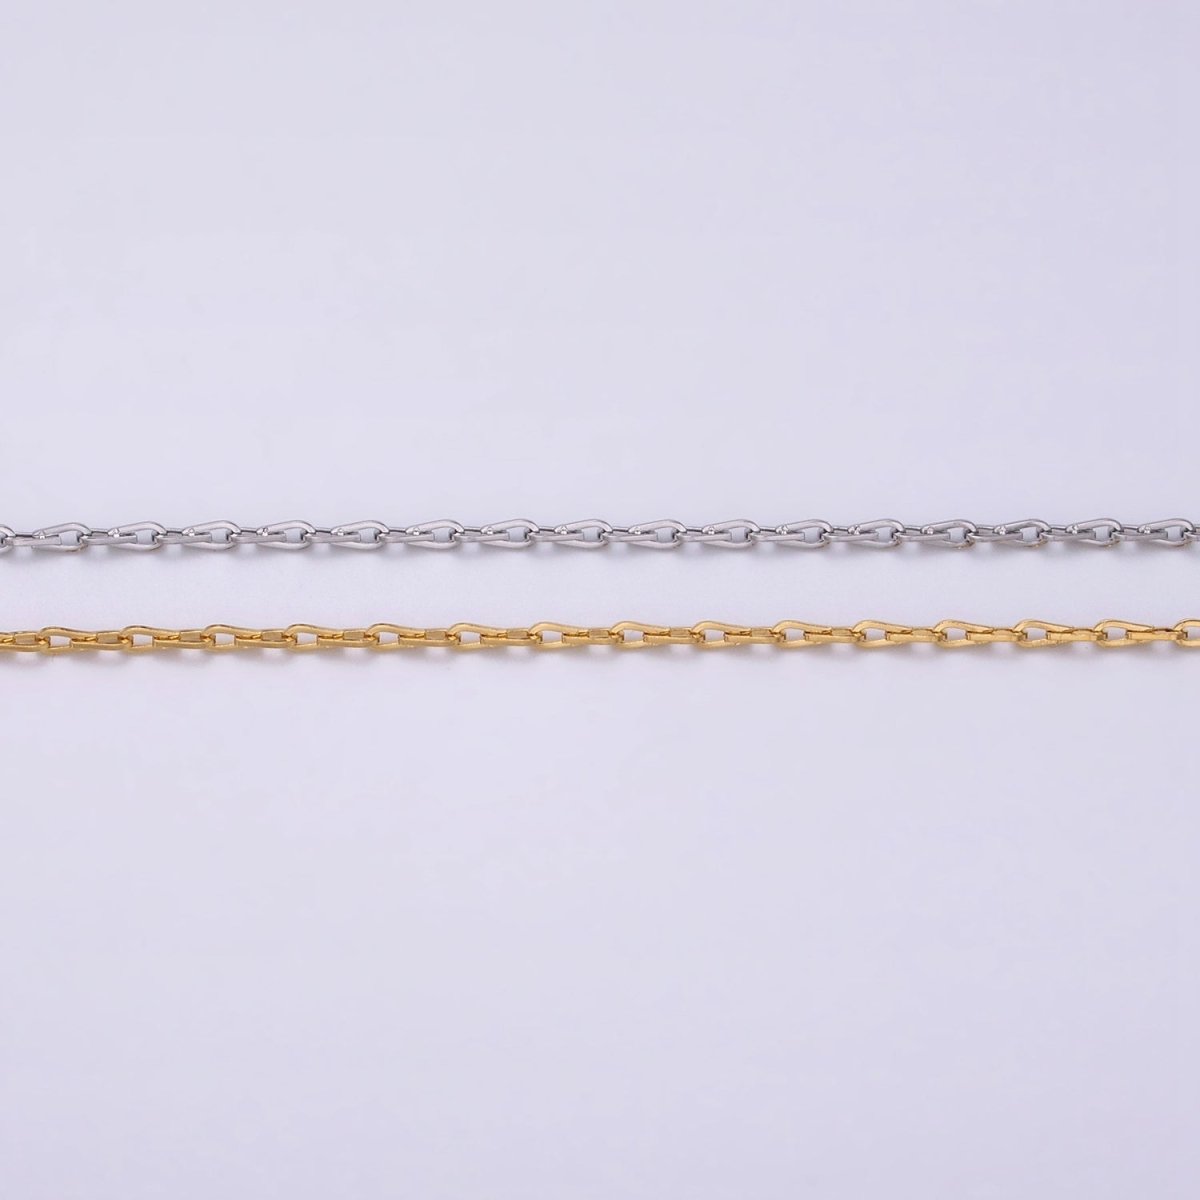 Dainty 16K Gold Filled Ladder Hook Horse Shoe Chain 1.7mm Unfinished chain by Yard Unique Horseshoe Link Chain | ROLL-1267 ROLL-1268 Clearance Pricing - DLUXCA